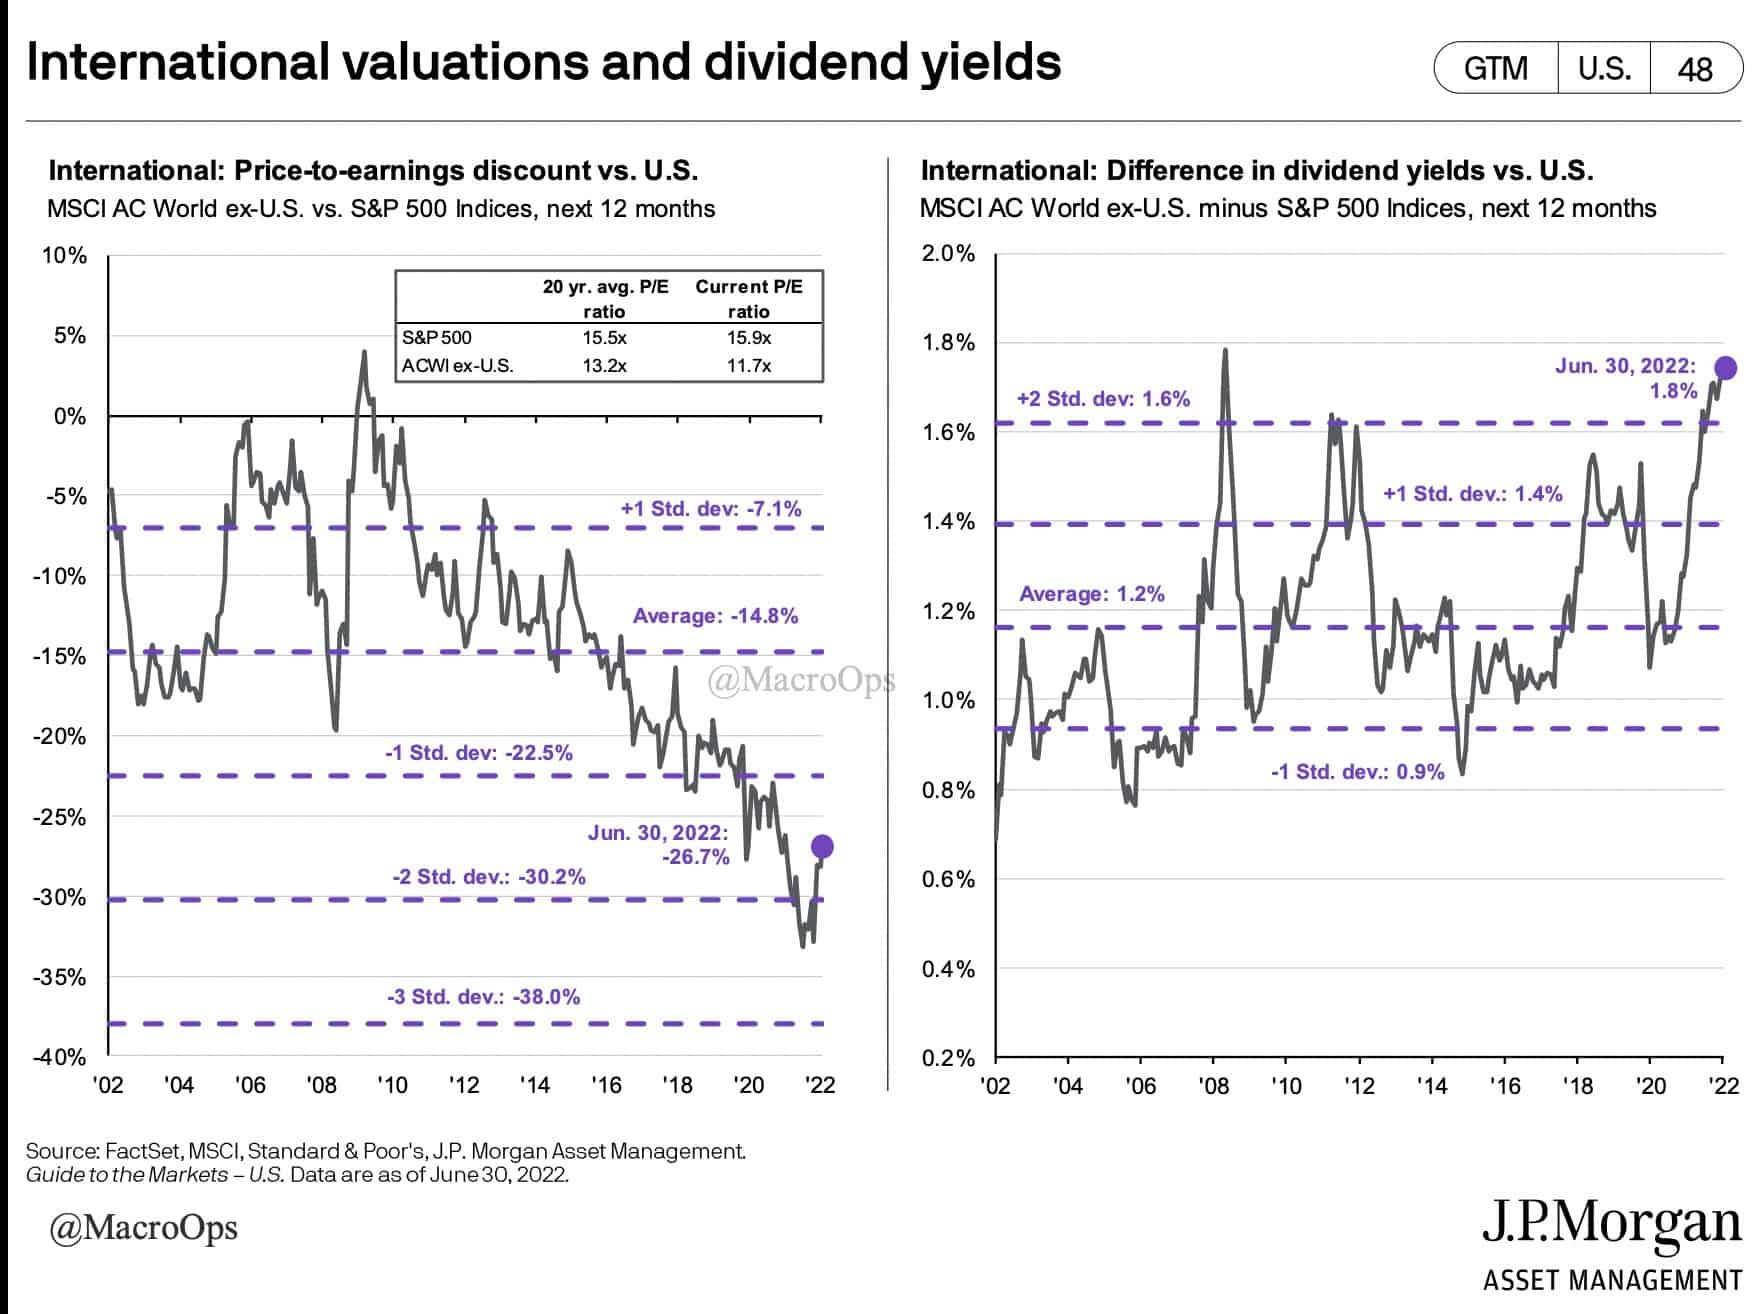 International Valuations and Dividend Yields